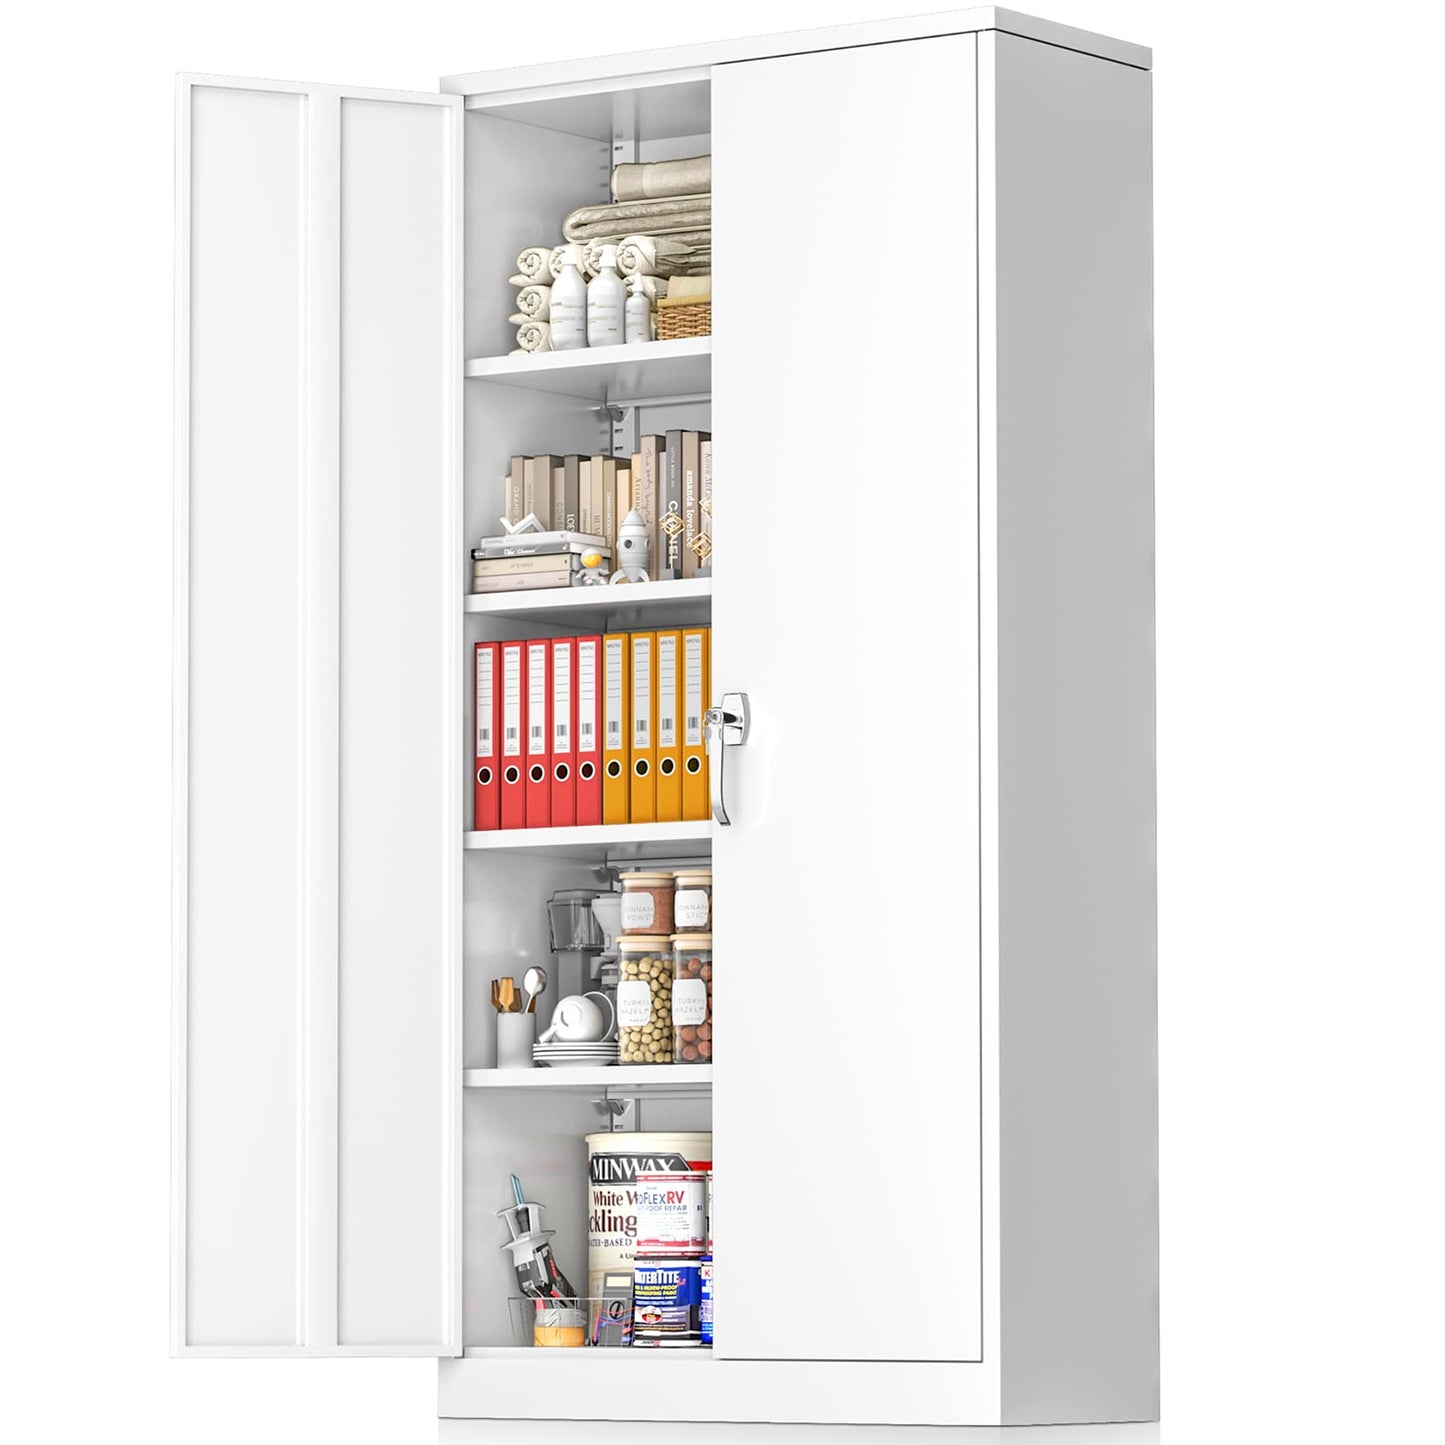 Greenvelly White Metal Storage Cabinet, 72" Steel Locking Cabinet with Doors and 4 Adjustable Shelves, Tall Tool Cabinets Lockable File Cabinet for